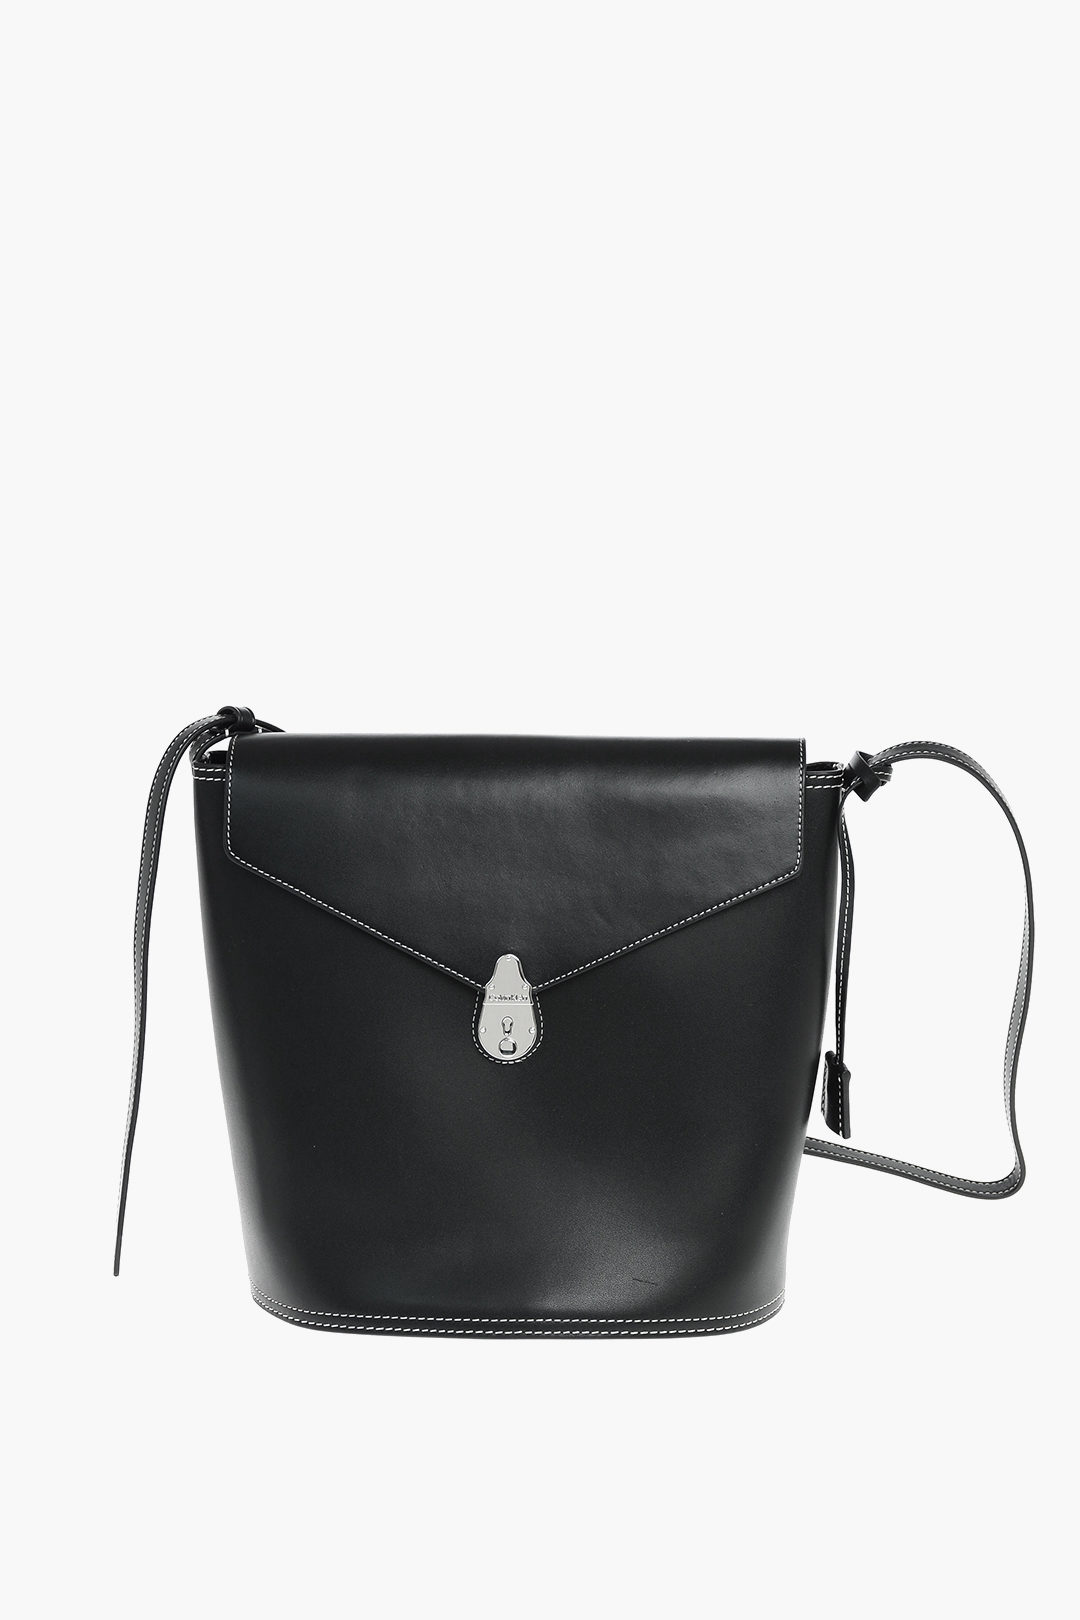 Calvin Klein Visible Stitching LOCK Leather Bucket Bag women - Glamood  Outlet